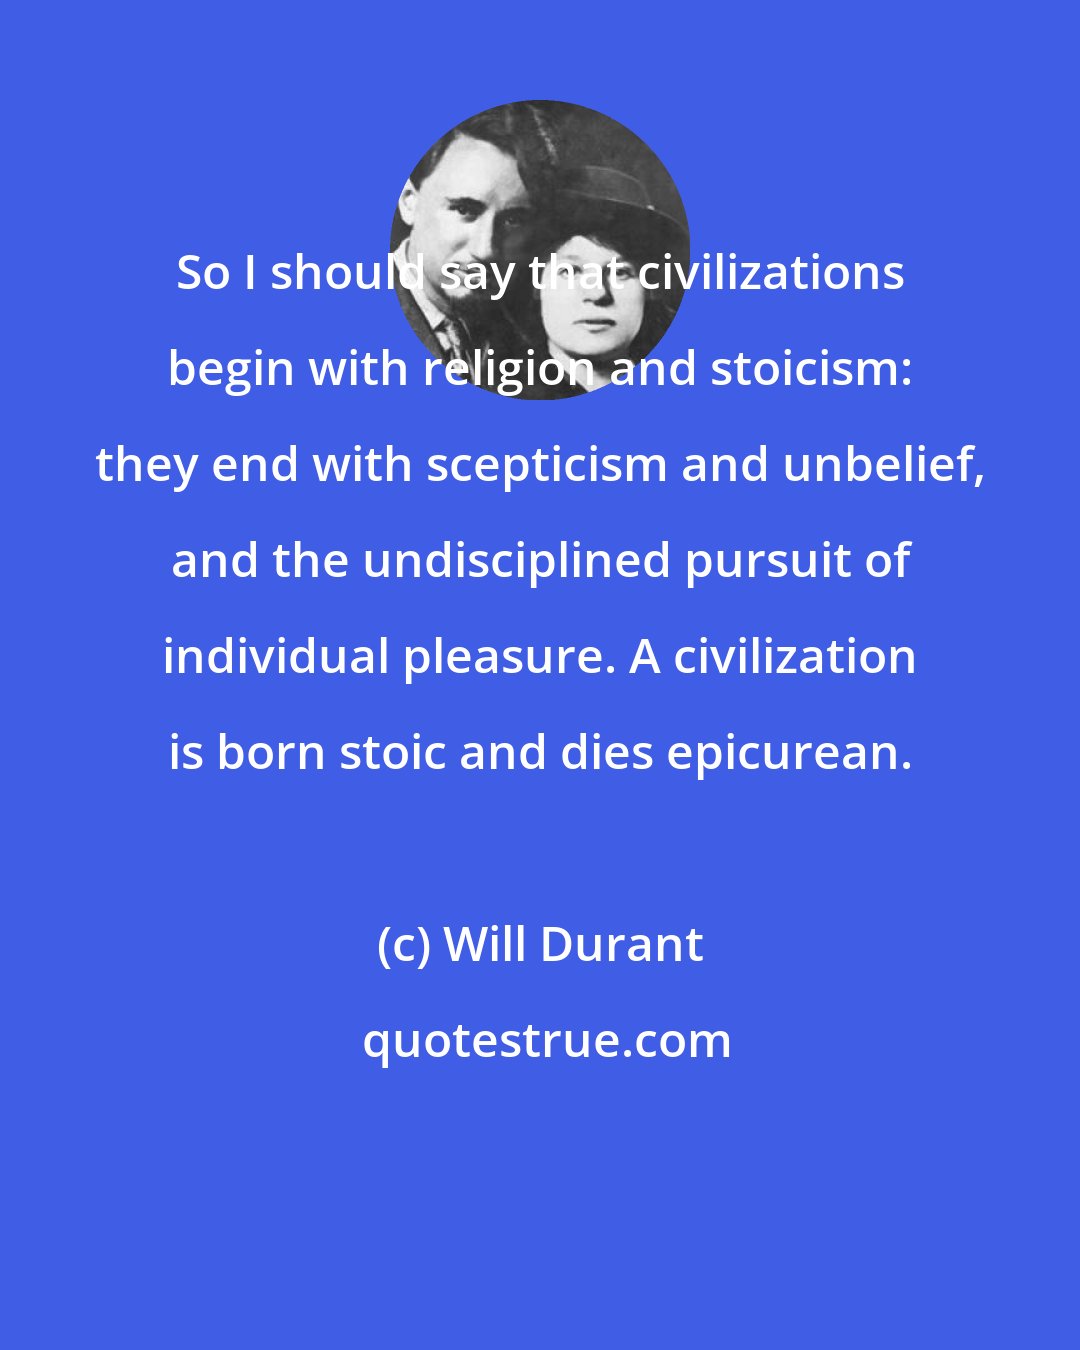 Will Durant: So I should say that civilizations begin with religion and stoicism: they end with scepticism and unbelief, and the undisciplined pursuit of individual pleasure. A civilization is born stoic and dies epicurean.